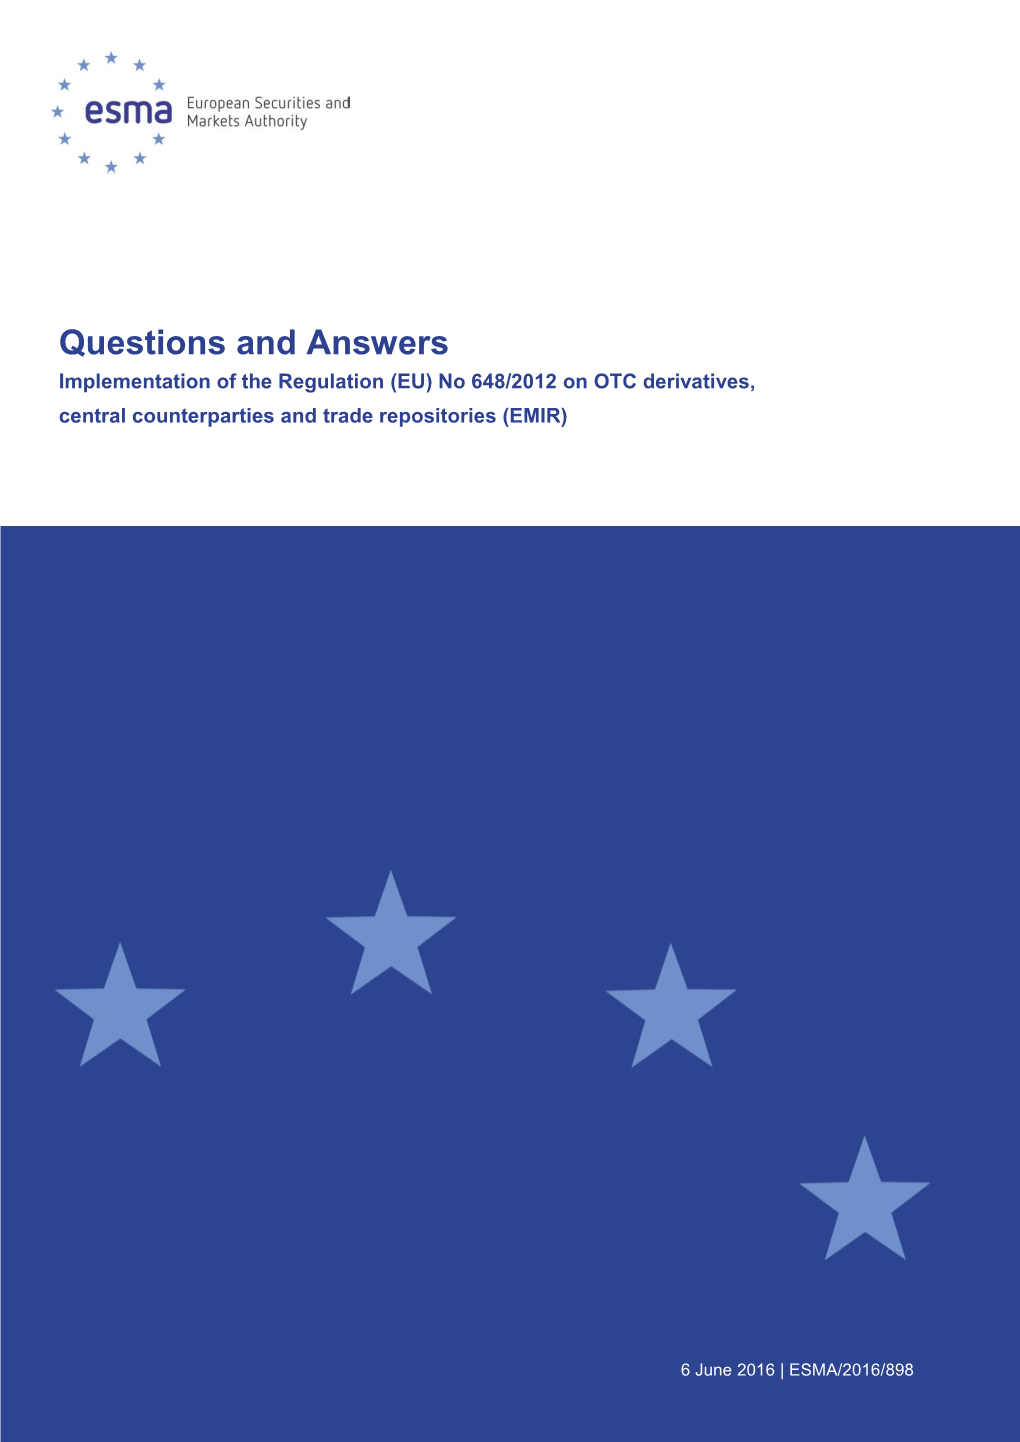 Questions and Answers Implementation of the Regulation (EU) No 648/2012 on OTC Derivatives, Central Counterparties and Trade Repositories (EMIR)